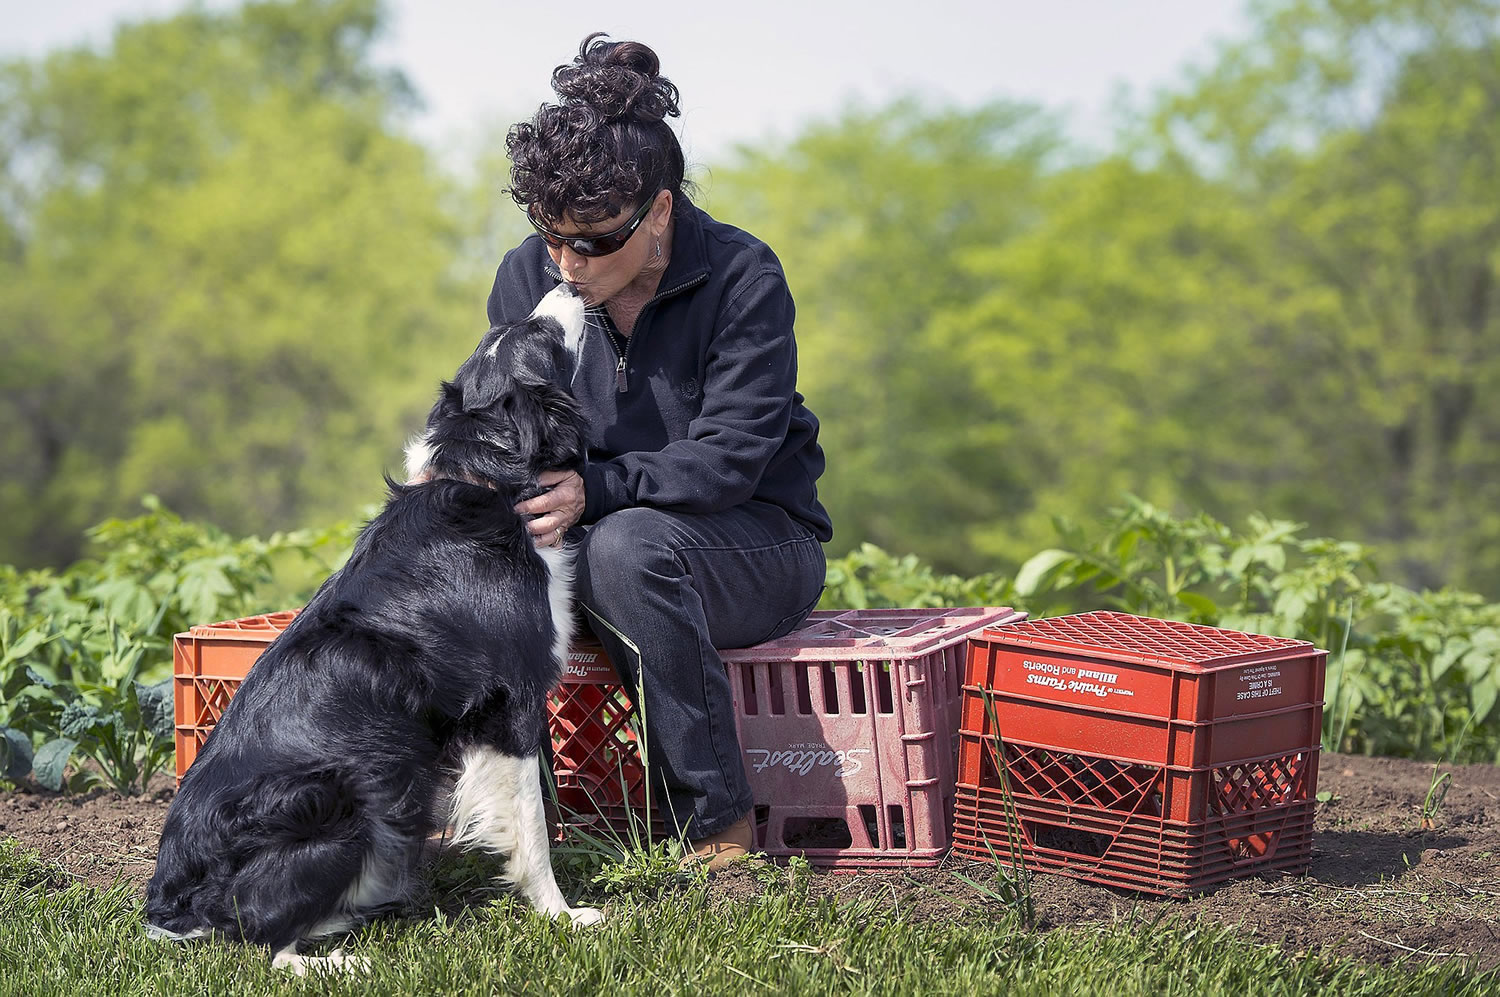 Alda Owen, 63, who is legally blind, gets a kiss May 13 from her dog and companion, Sweet Baby Jo, a 3-year-old border collie who is her constant companion, on her farm near Maysville, Mo., in DeKalb County.